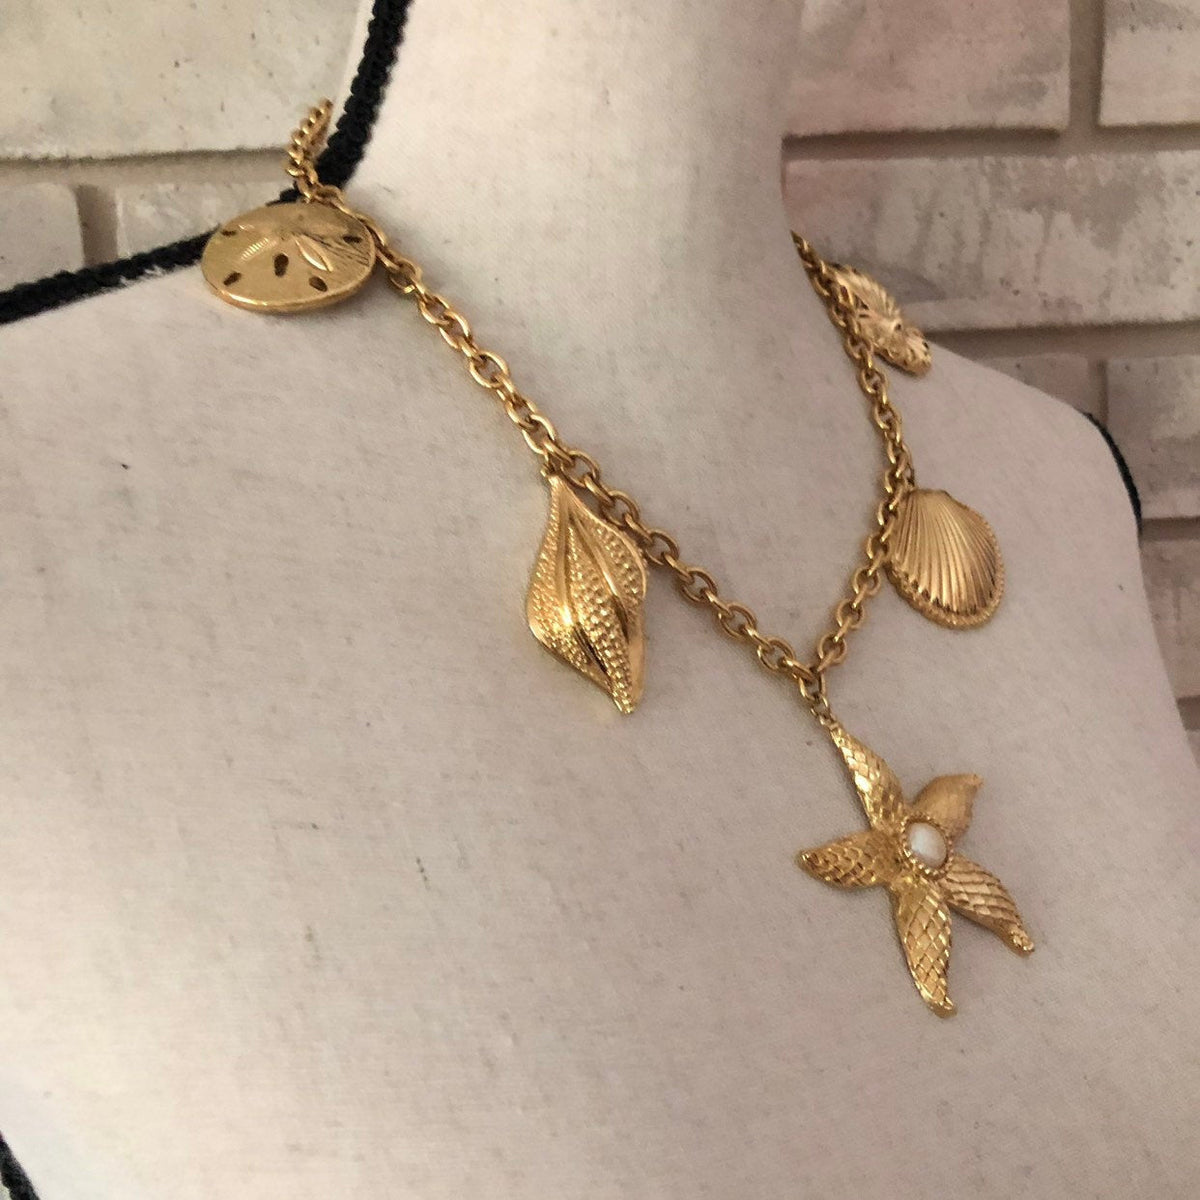 Kenneth Jay Lane Classic Gold Shell & Starfish Charm Chain Necklace - 24 Wishes Vintage Jewelry